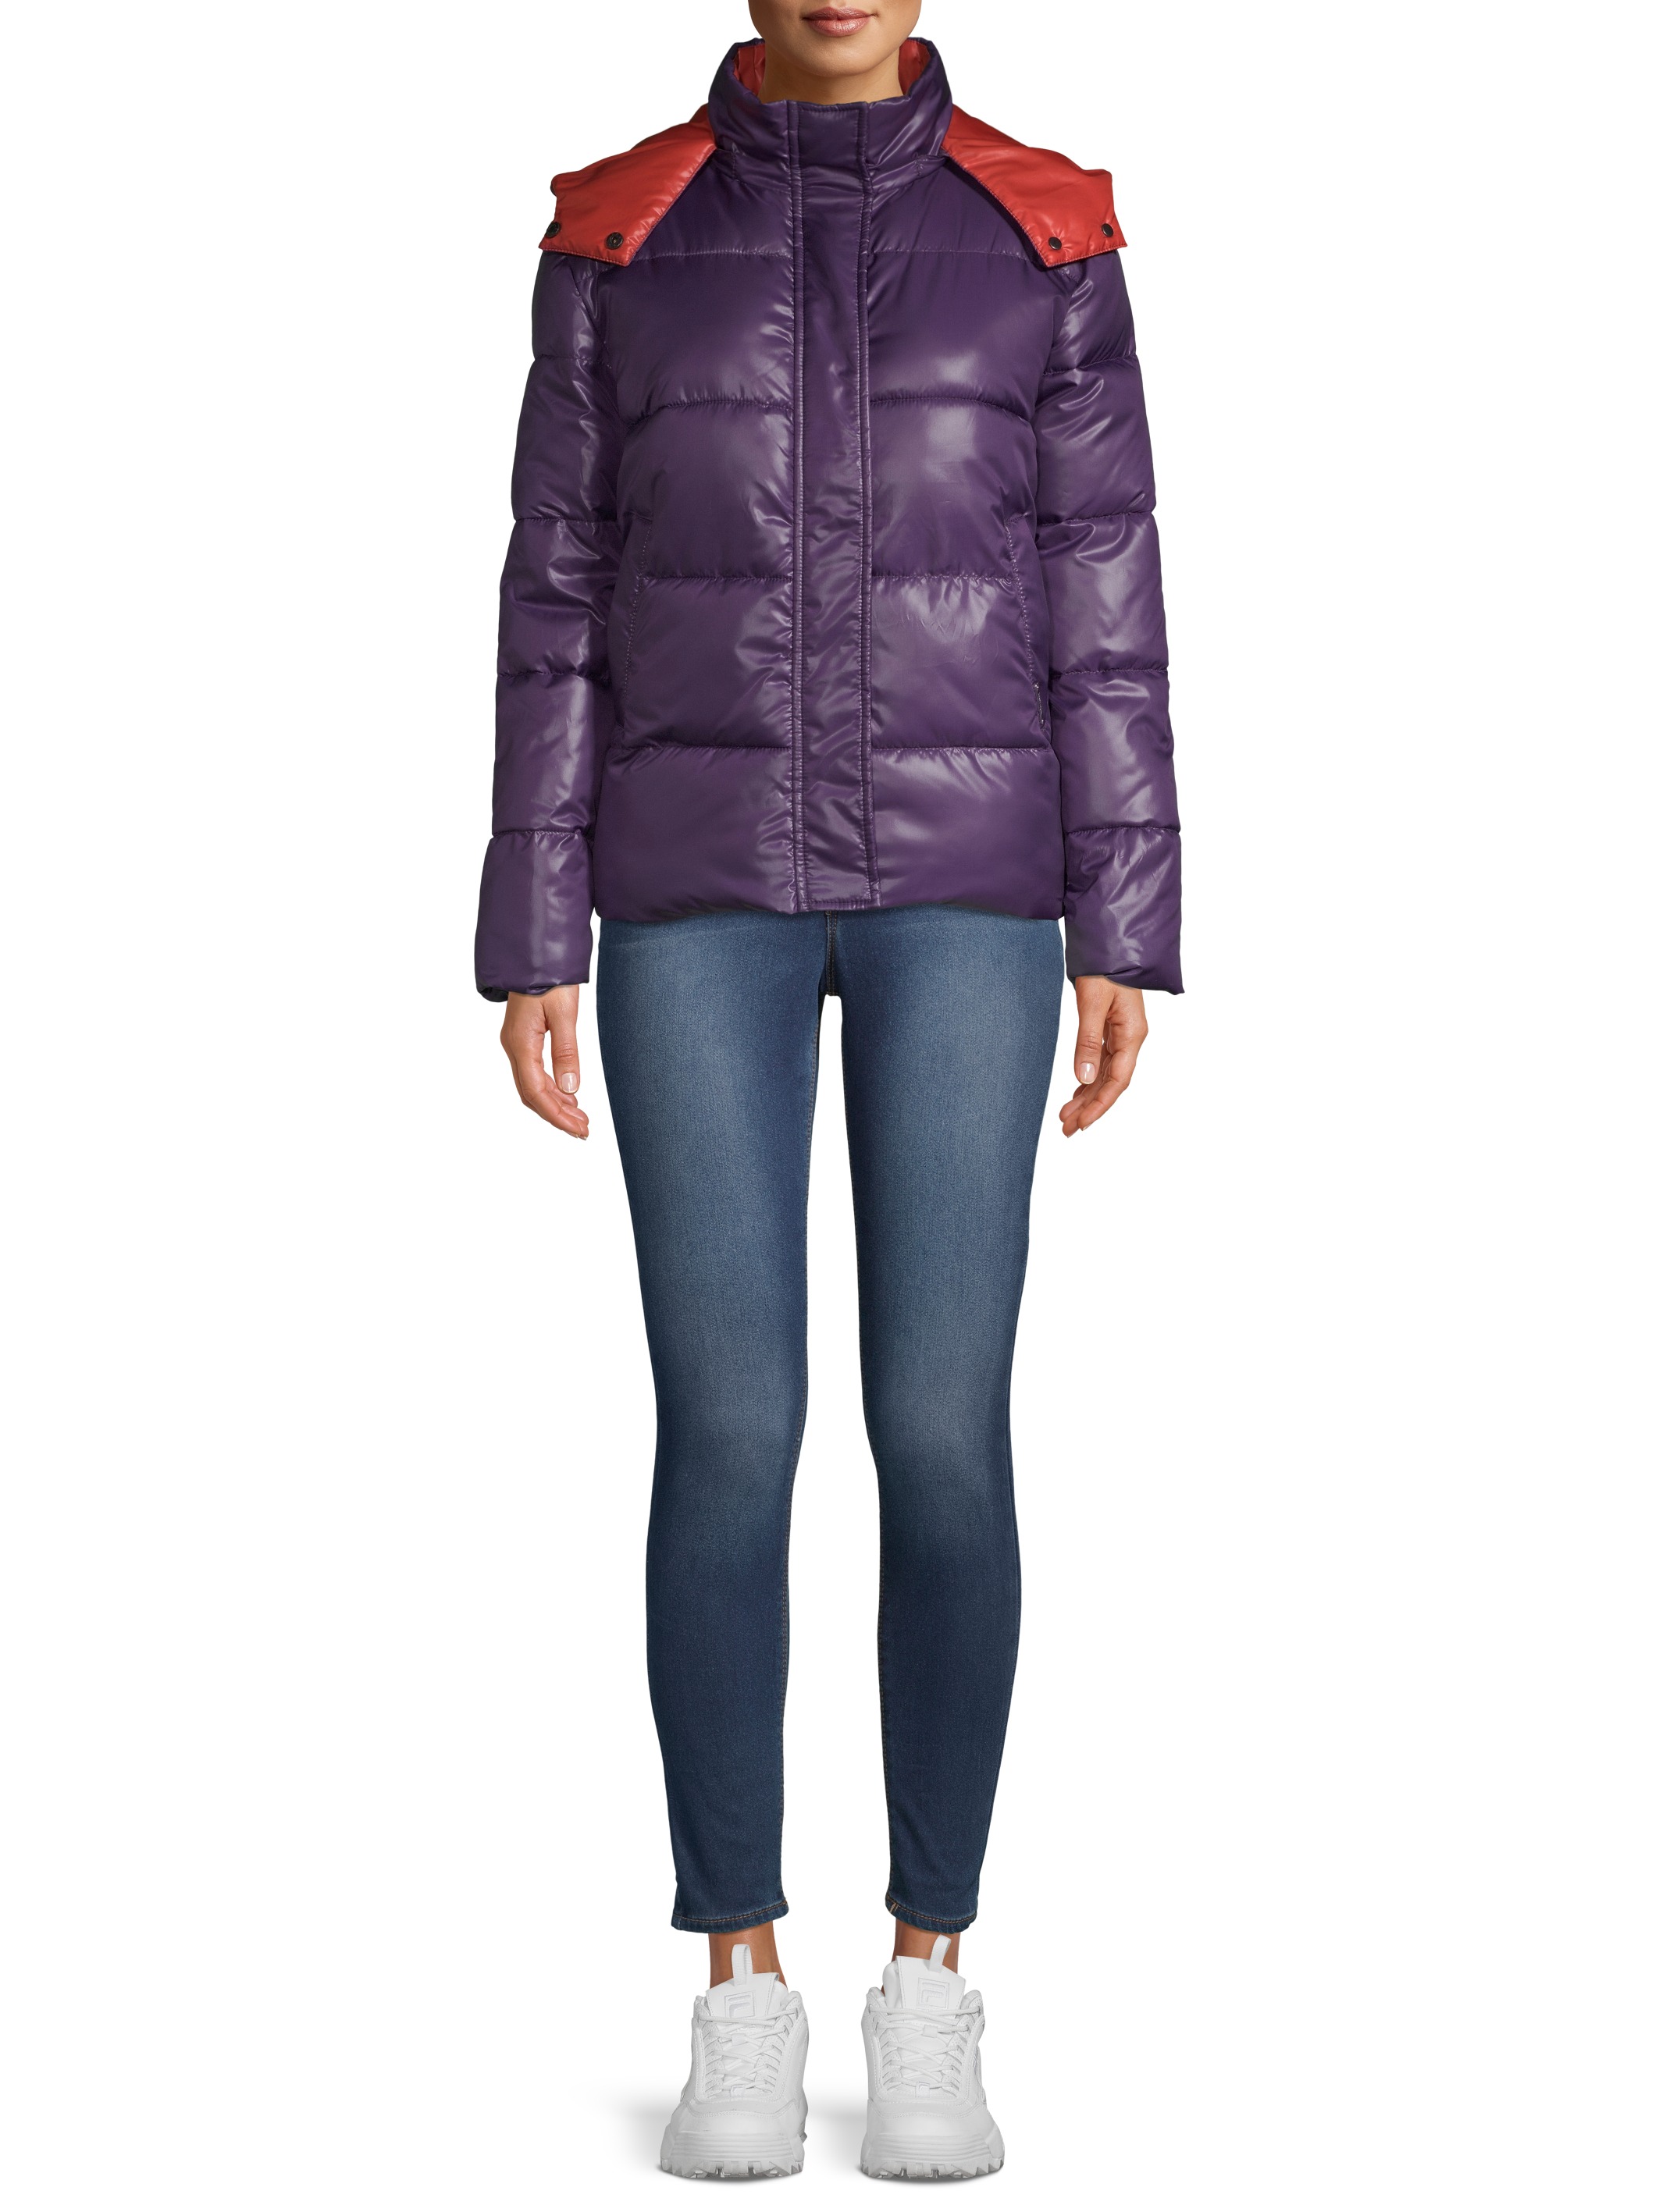 Kendall + Kylie Women's Two Tone Puffer - image 5 of 6